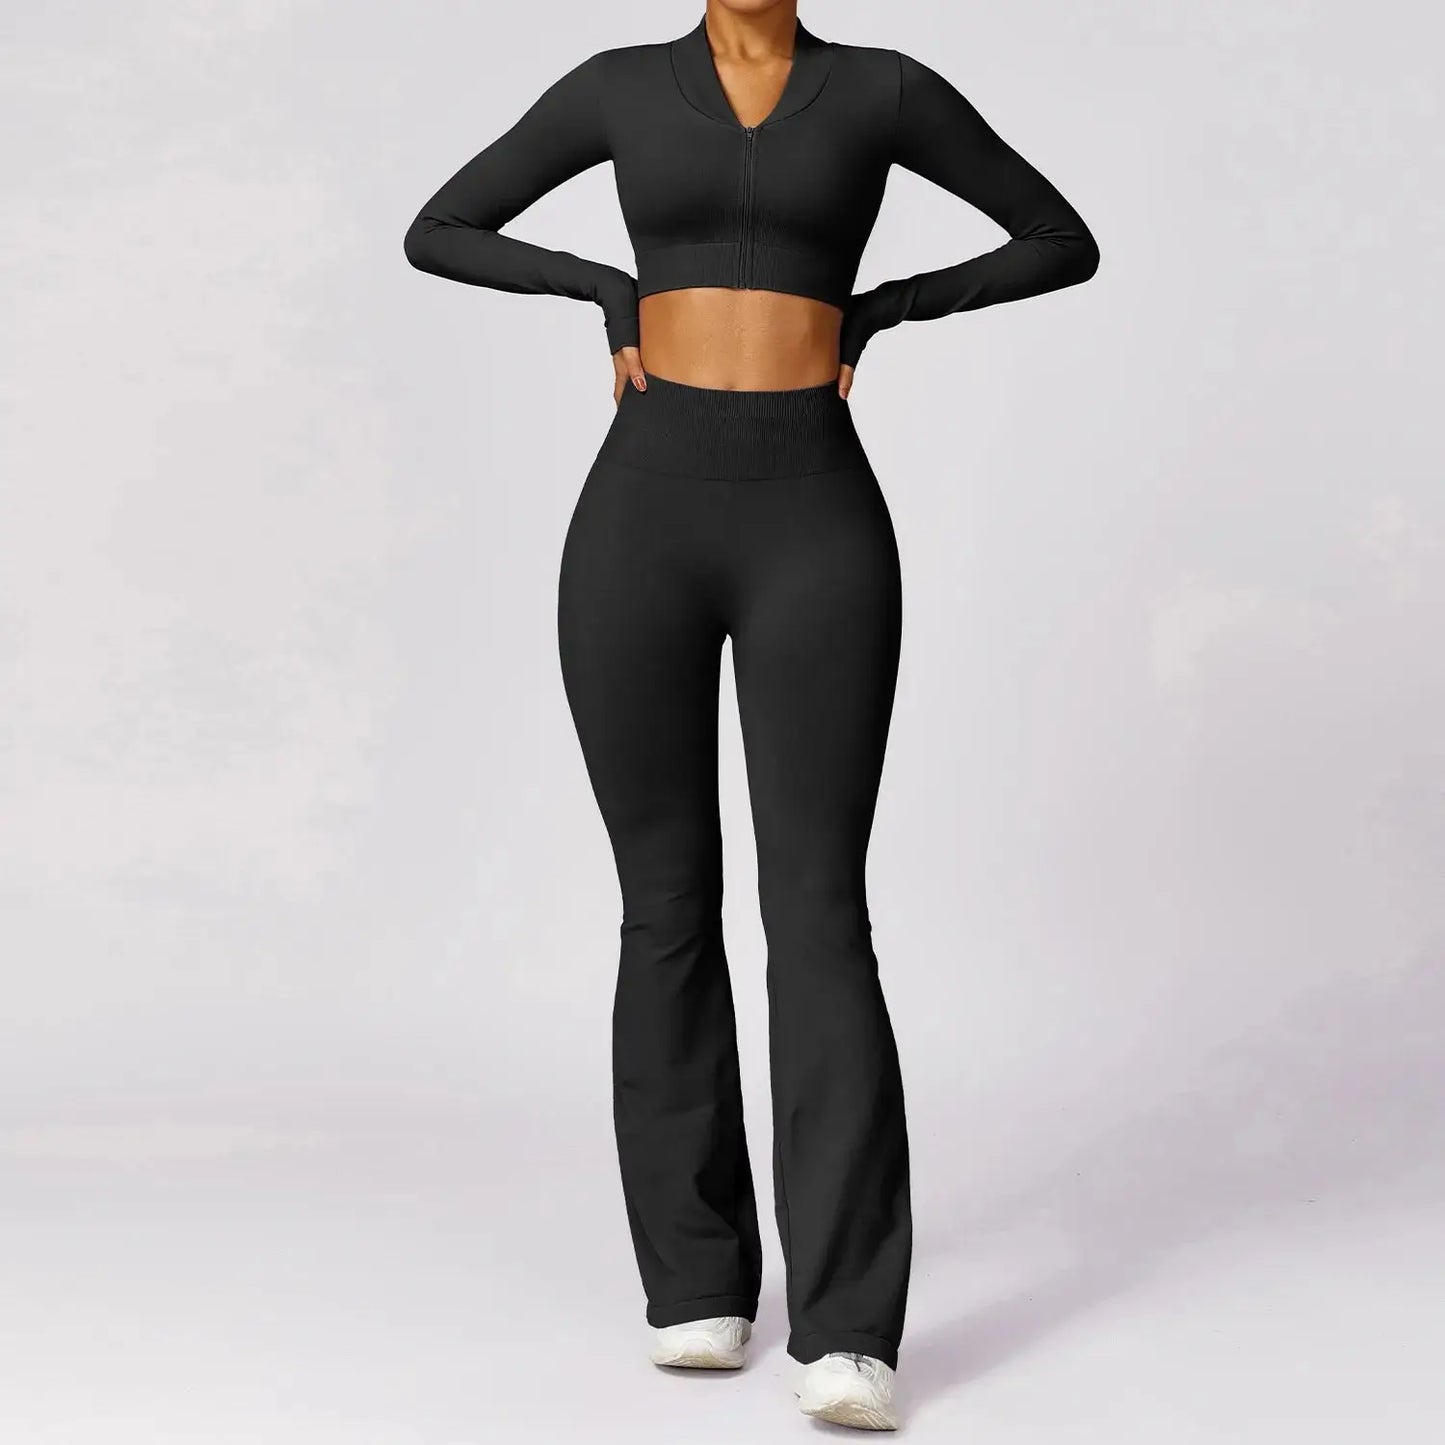 YIYI Fashion Seamless Crop Jackets Flare Leggings Sets Women Gym Fitness Sets Workout Outdoor Organic Wear Athletic Yoga Suit